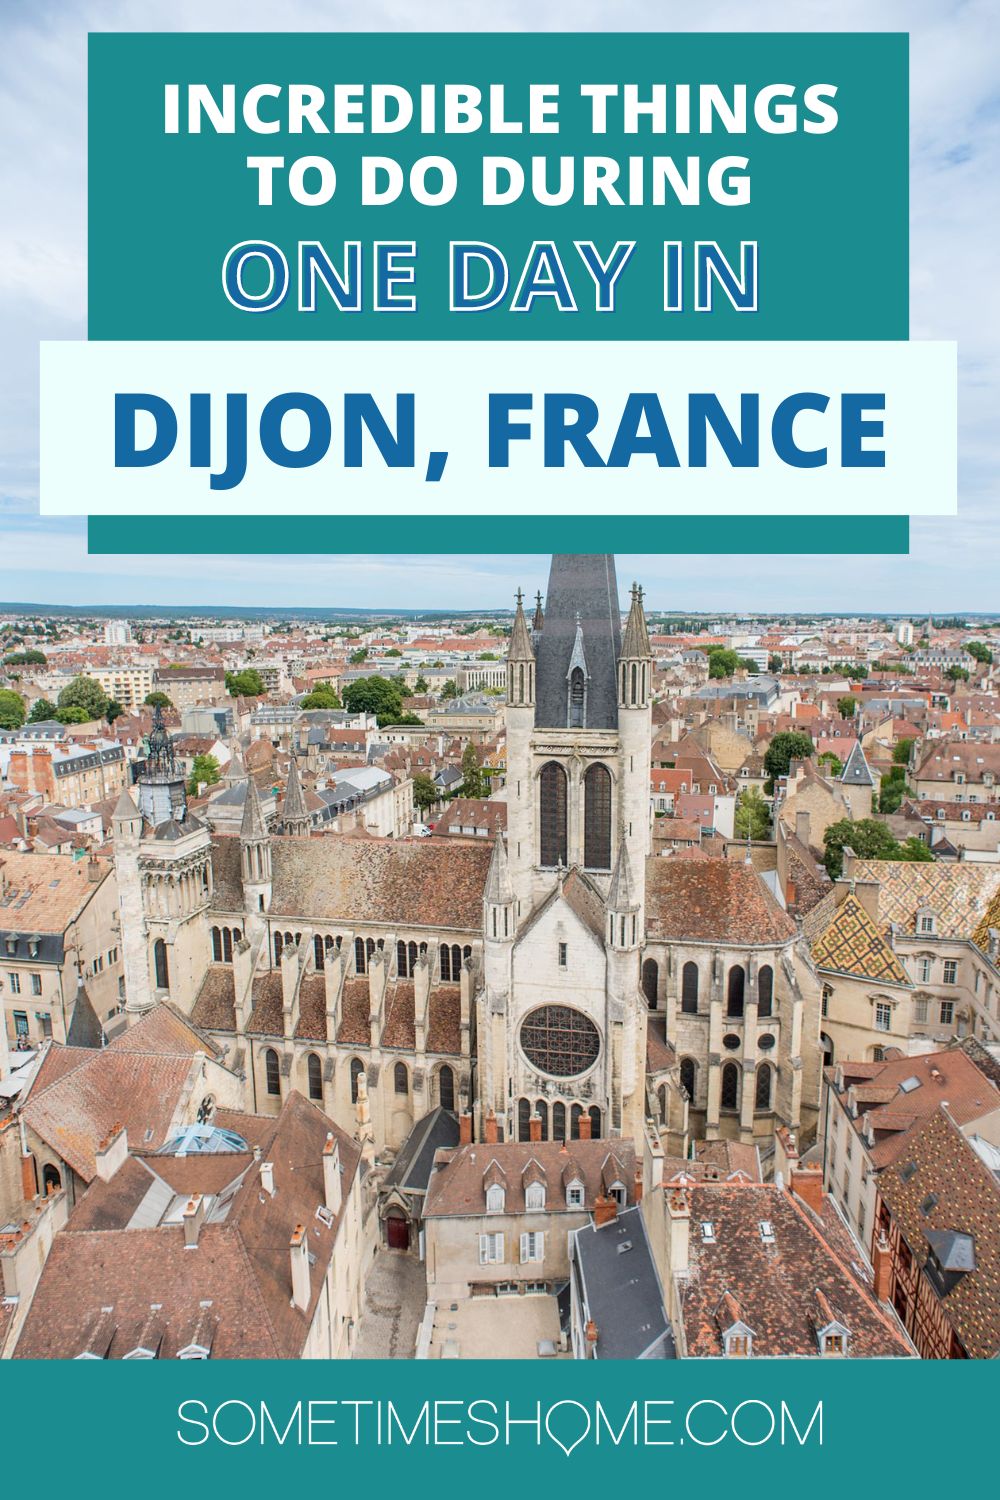 Incredible things to do during one day in Dijon, France, with a bird's eye view picture looking down on the city.